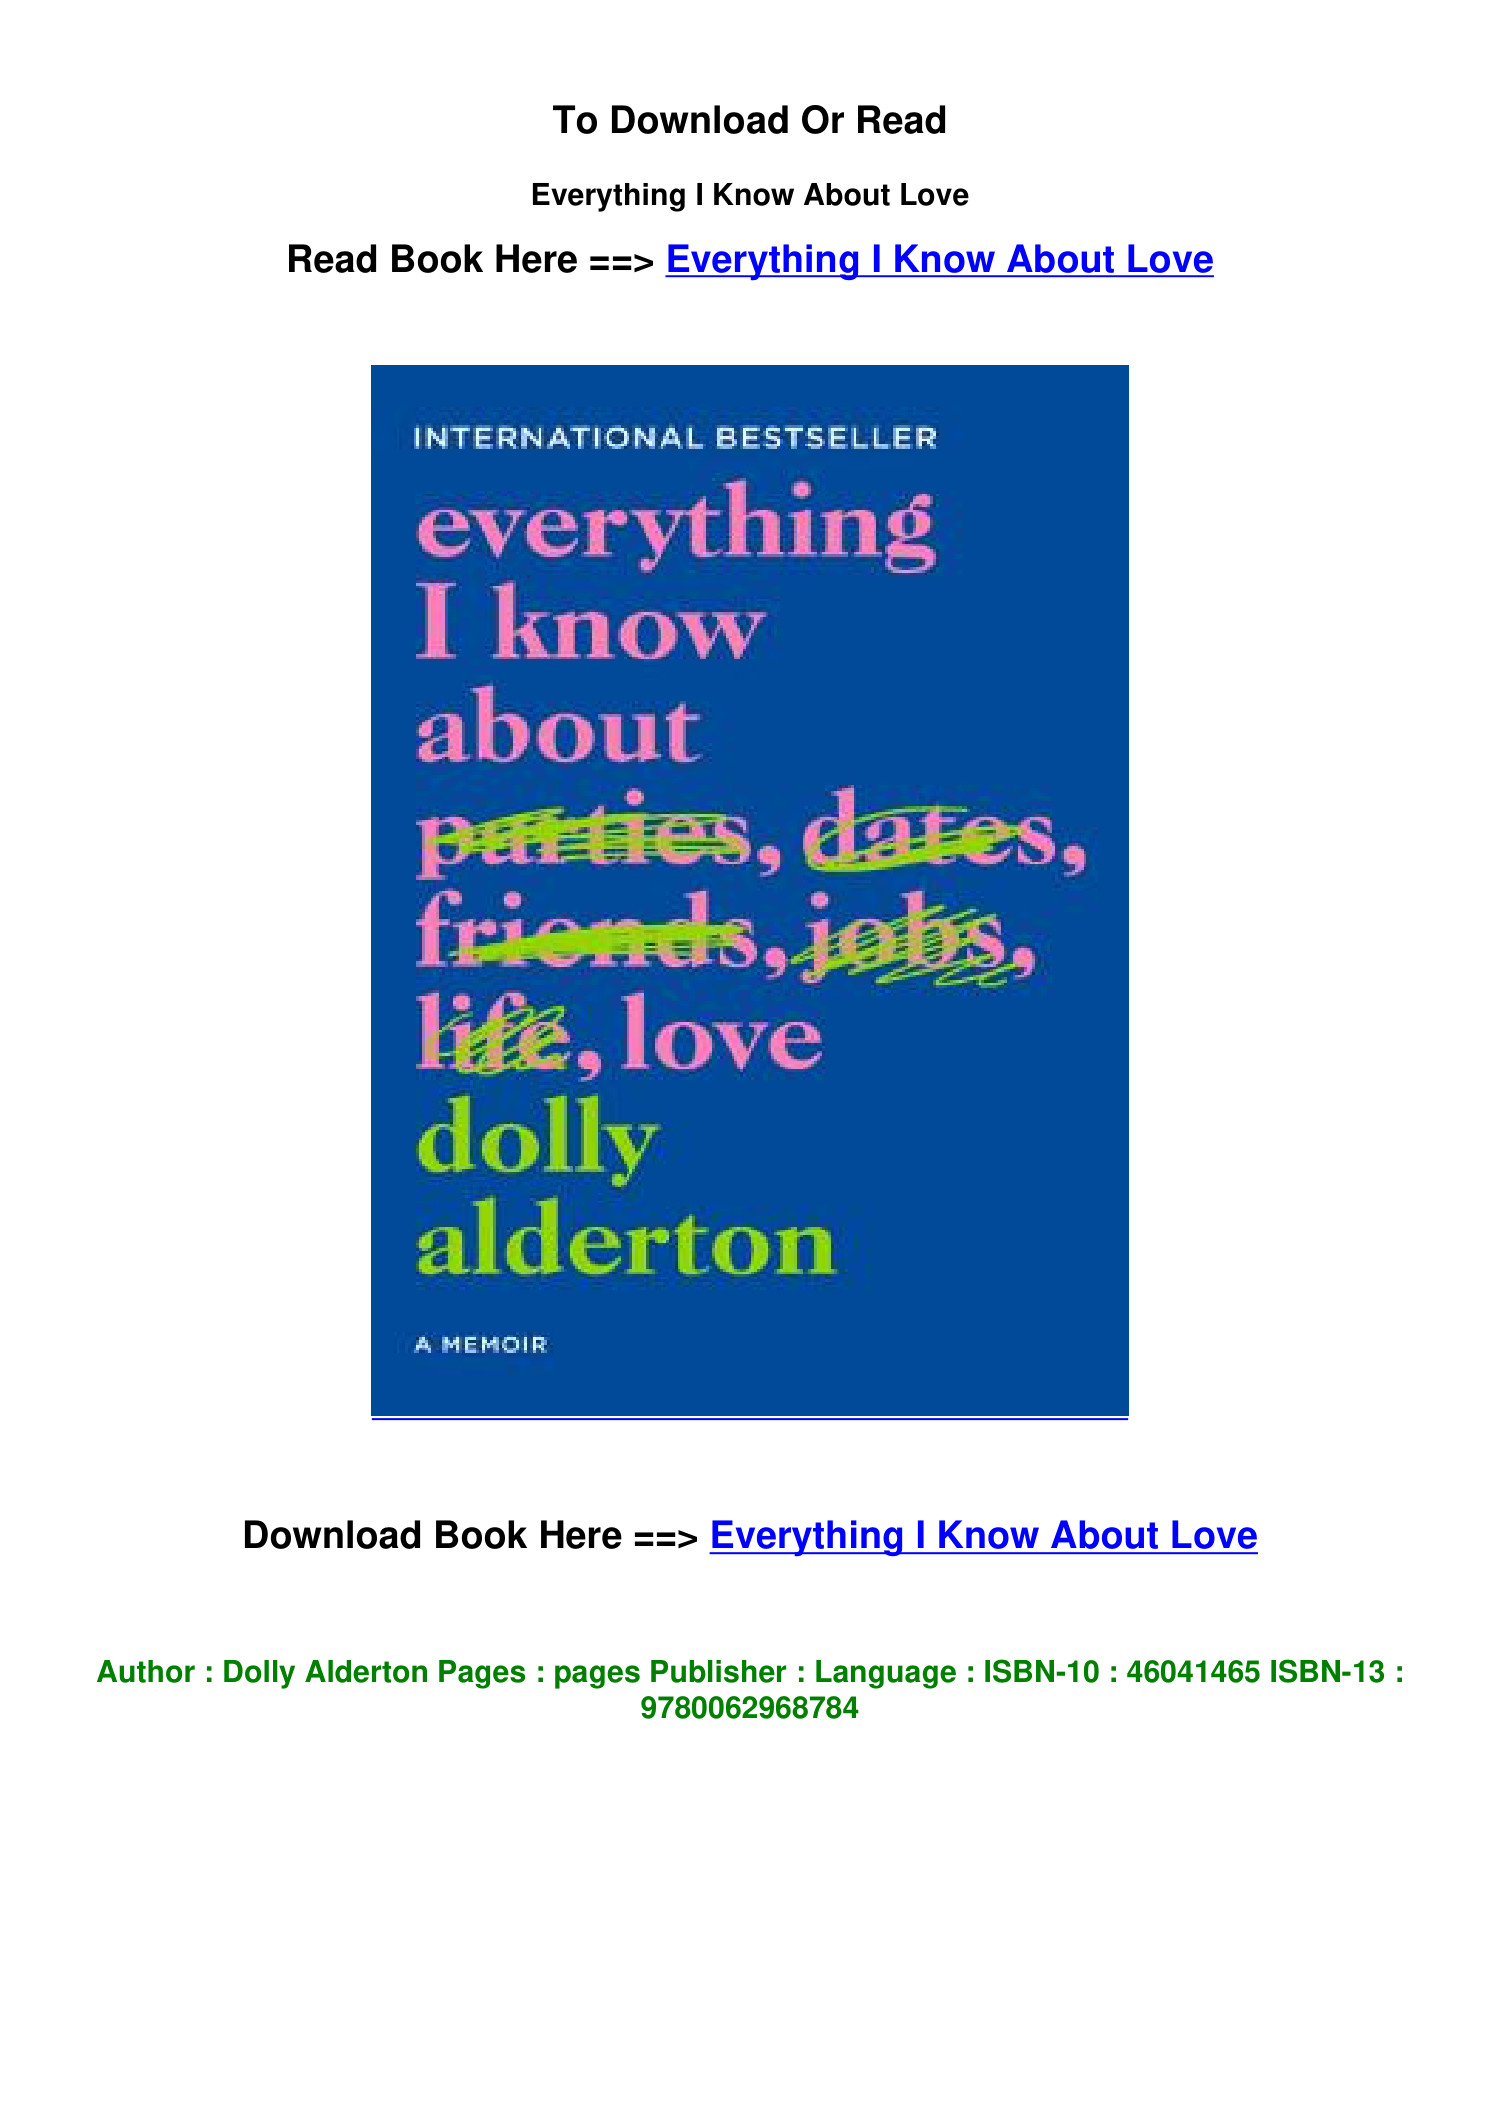 PDF DOWNLOAD Everything I Know About Love By Dolly Alderton.pdf